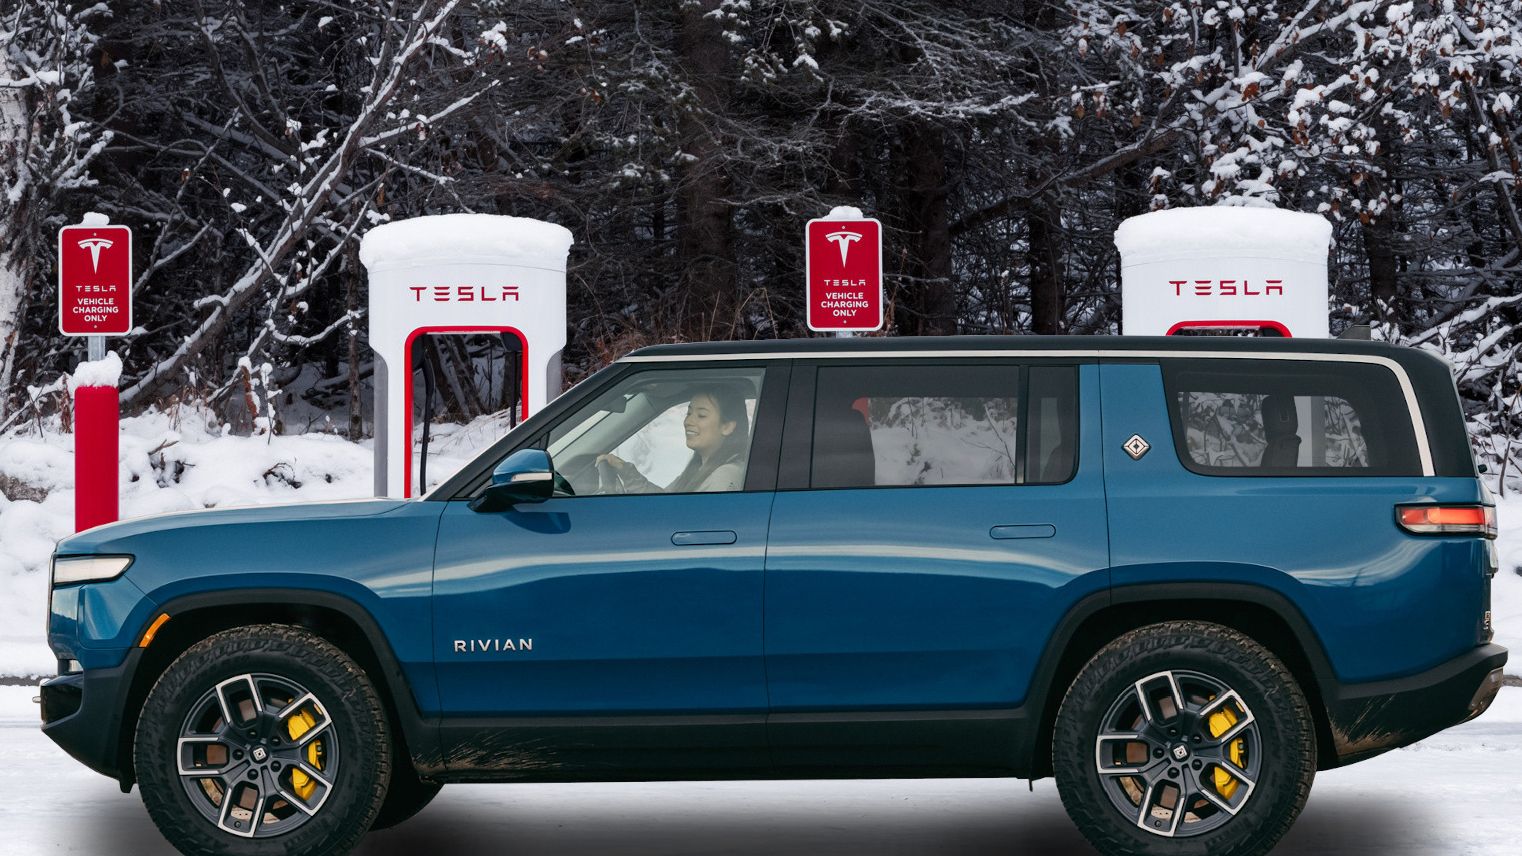 A fictional depiction of a blue Rivian R1S SUV alongside two Tesla Supercharger stalls.